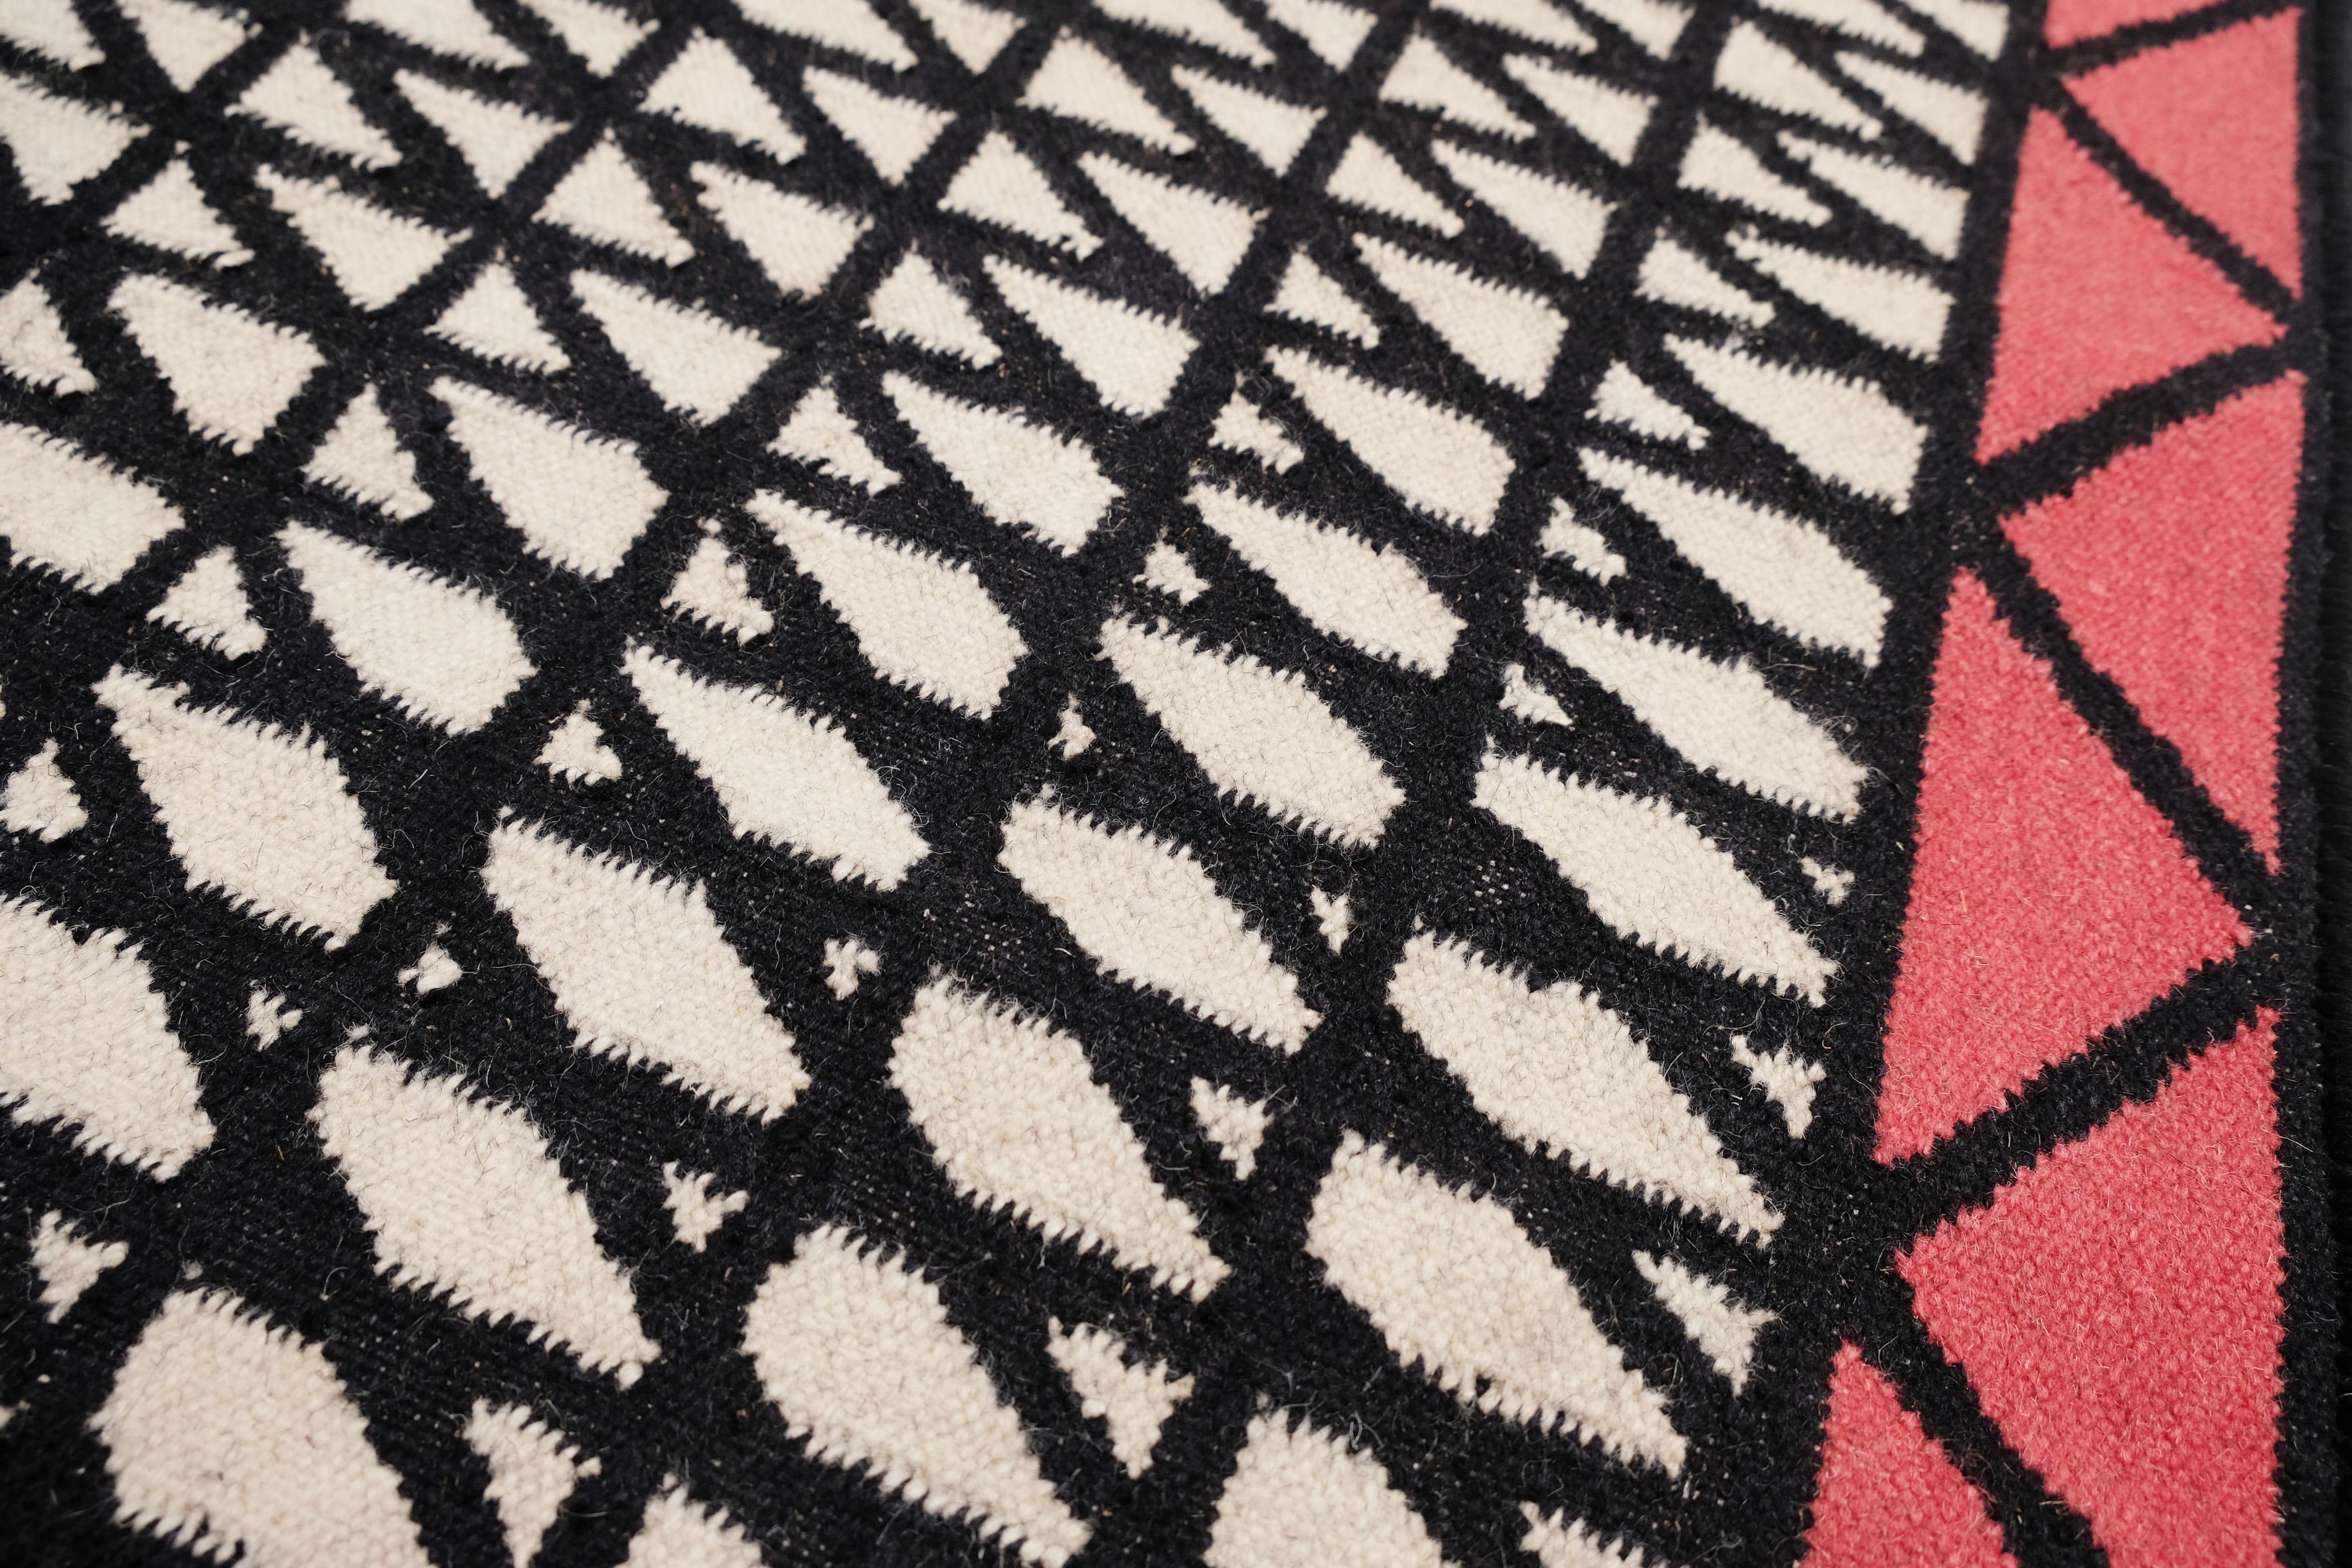 Kilim Hatch I

The new I+I Kilims approach contemporary geometry. 
Constructed as a flatweave in the manner of traditional dhurrie floor coverings,  these rugs are a remarkable example of skilled craftsmanship. Modern through a traditional